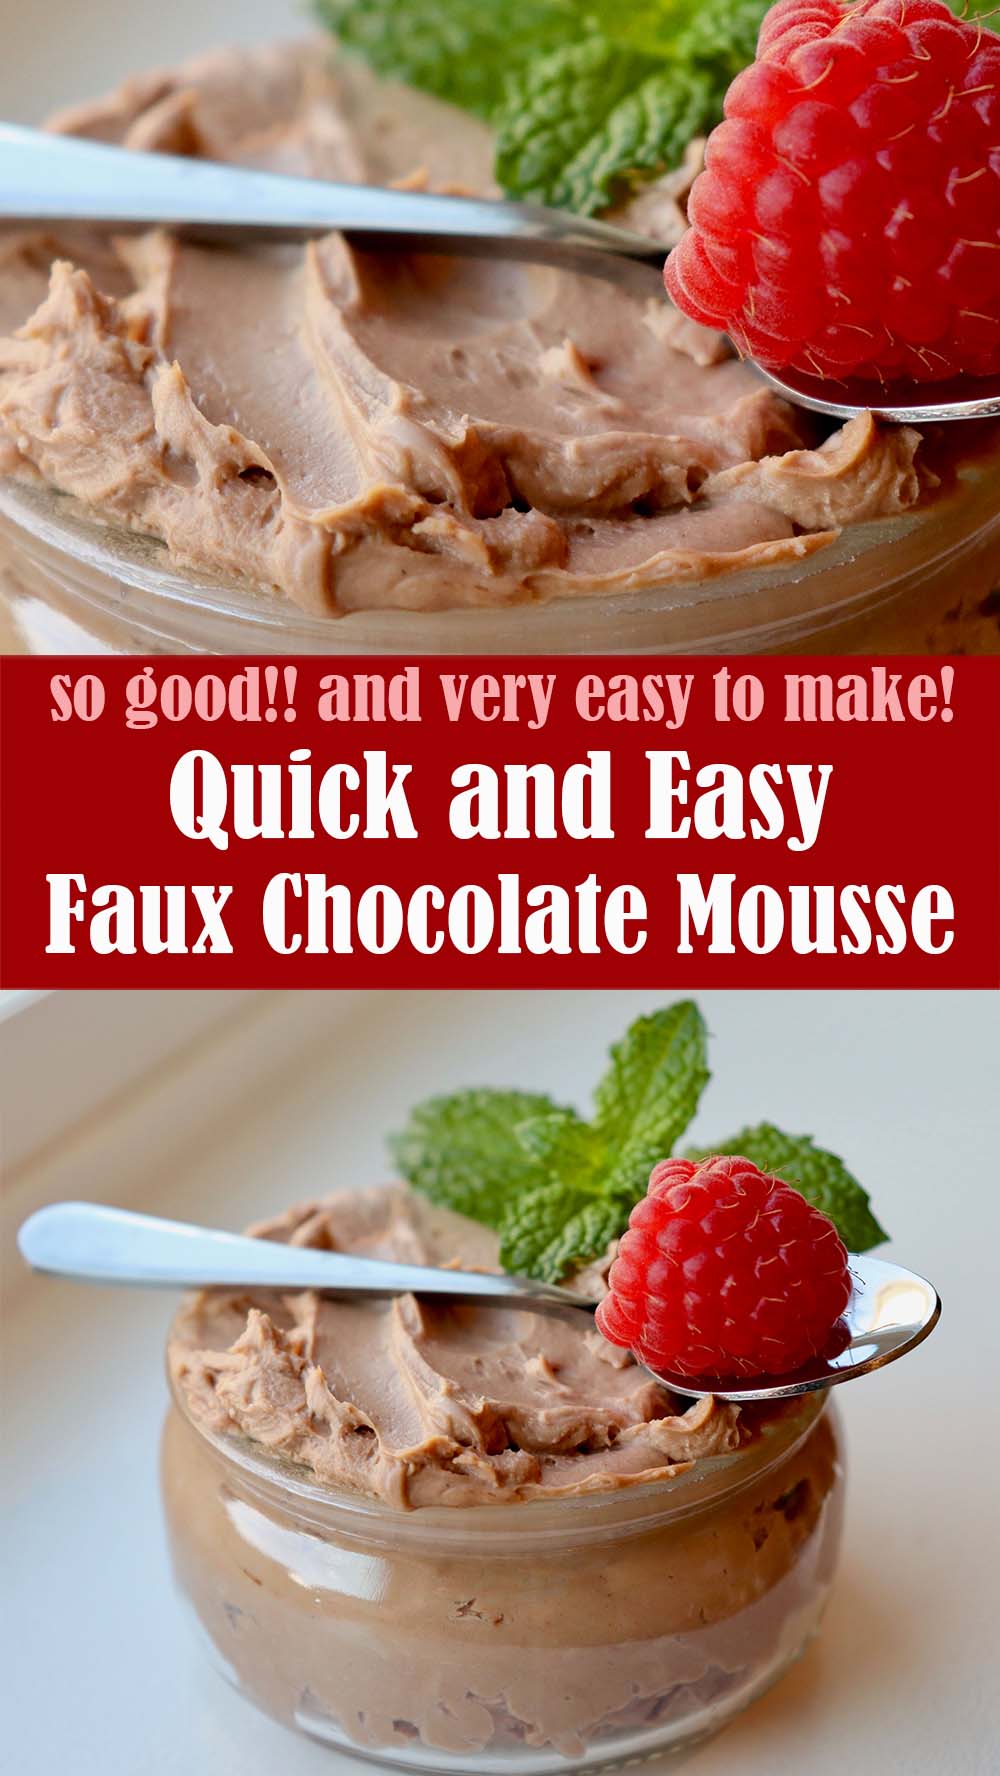 Quick and Easy Faux Chocolate Mousse